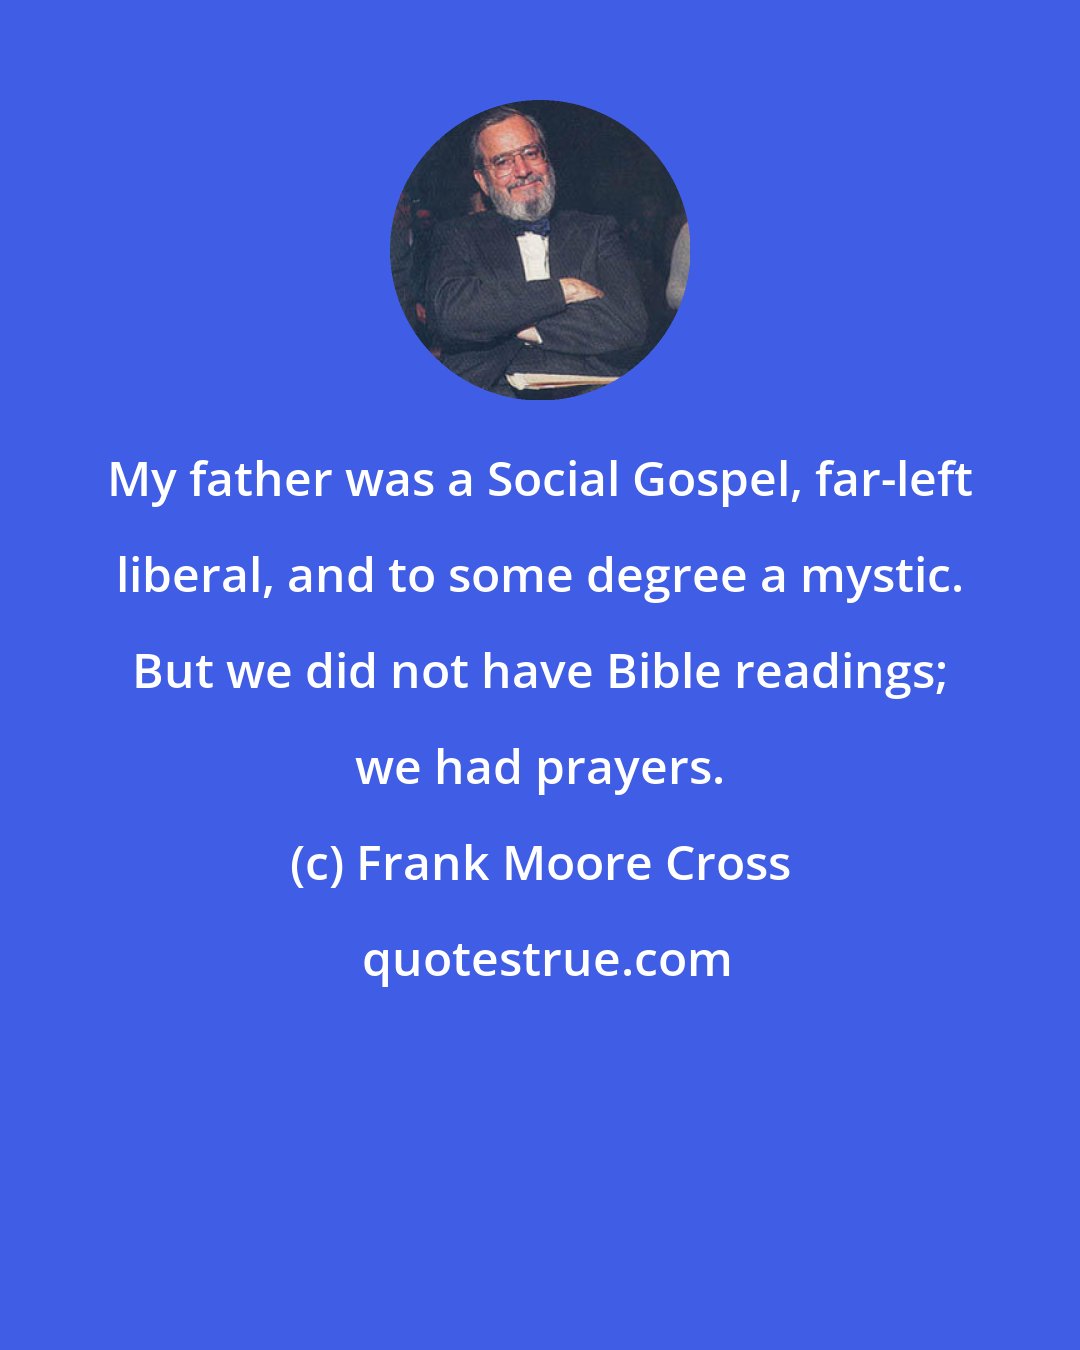 Frank Moore Cross: My father was a Social Gospel, far-left liberal, and to some degree a mystic. But we did not have Bible readings; we had prayers.